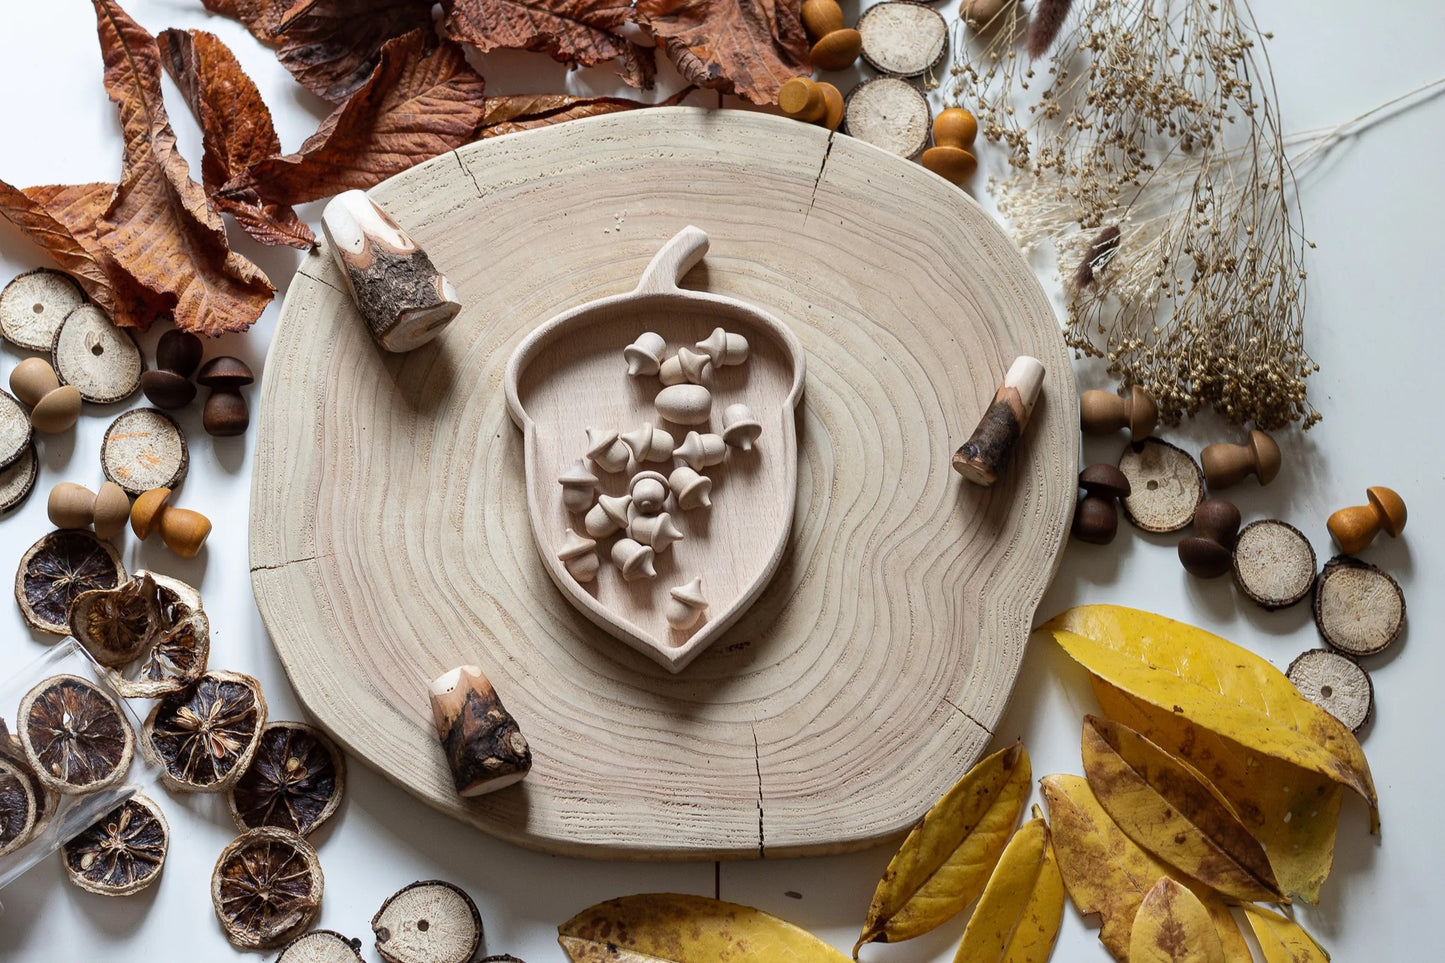 Acorn Sorting Tray with wooden acorns